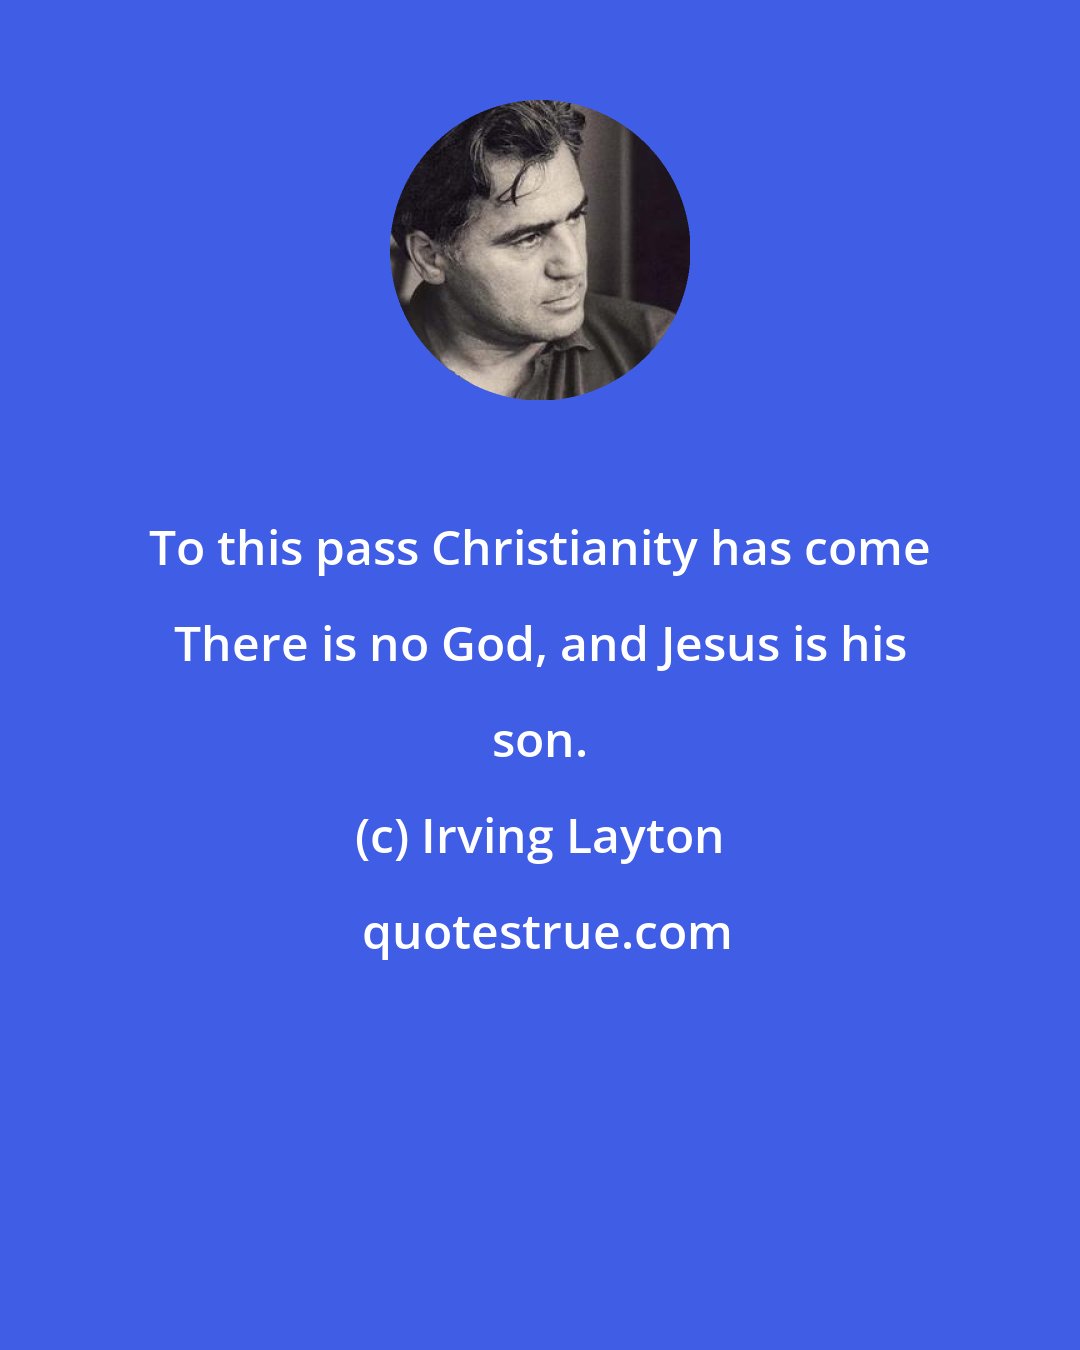 Irving Layton: To this pass Christianity has come There is no God, and Jesus is his son.